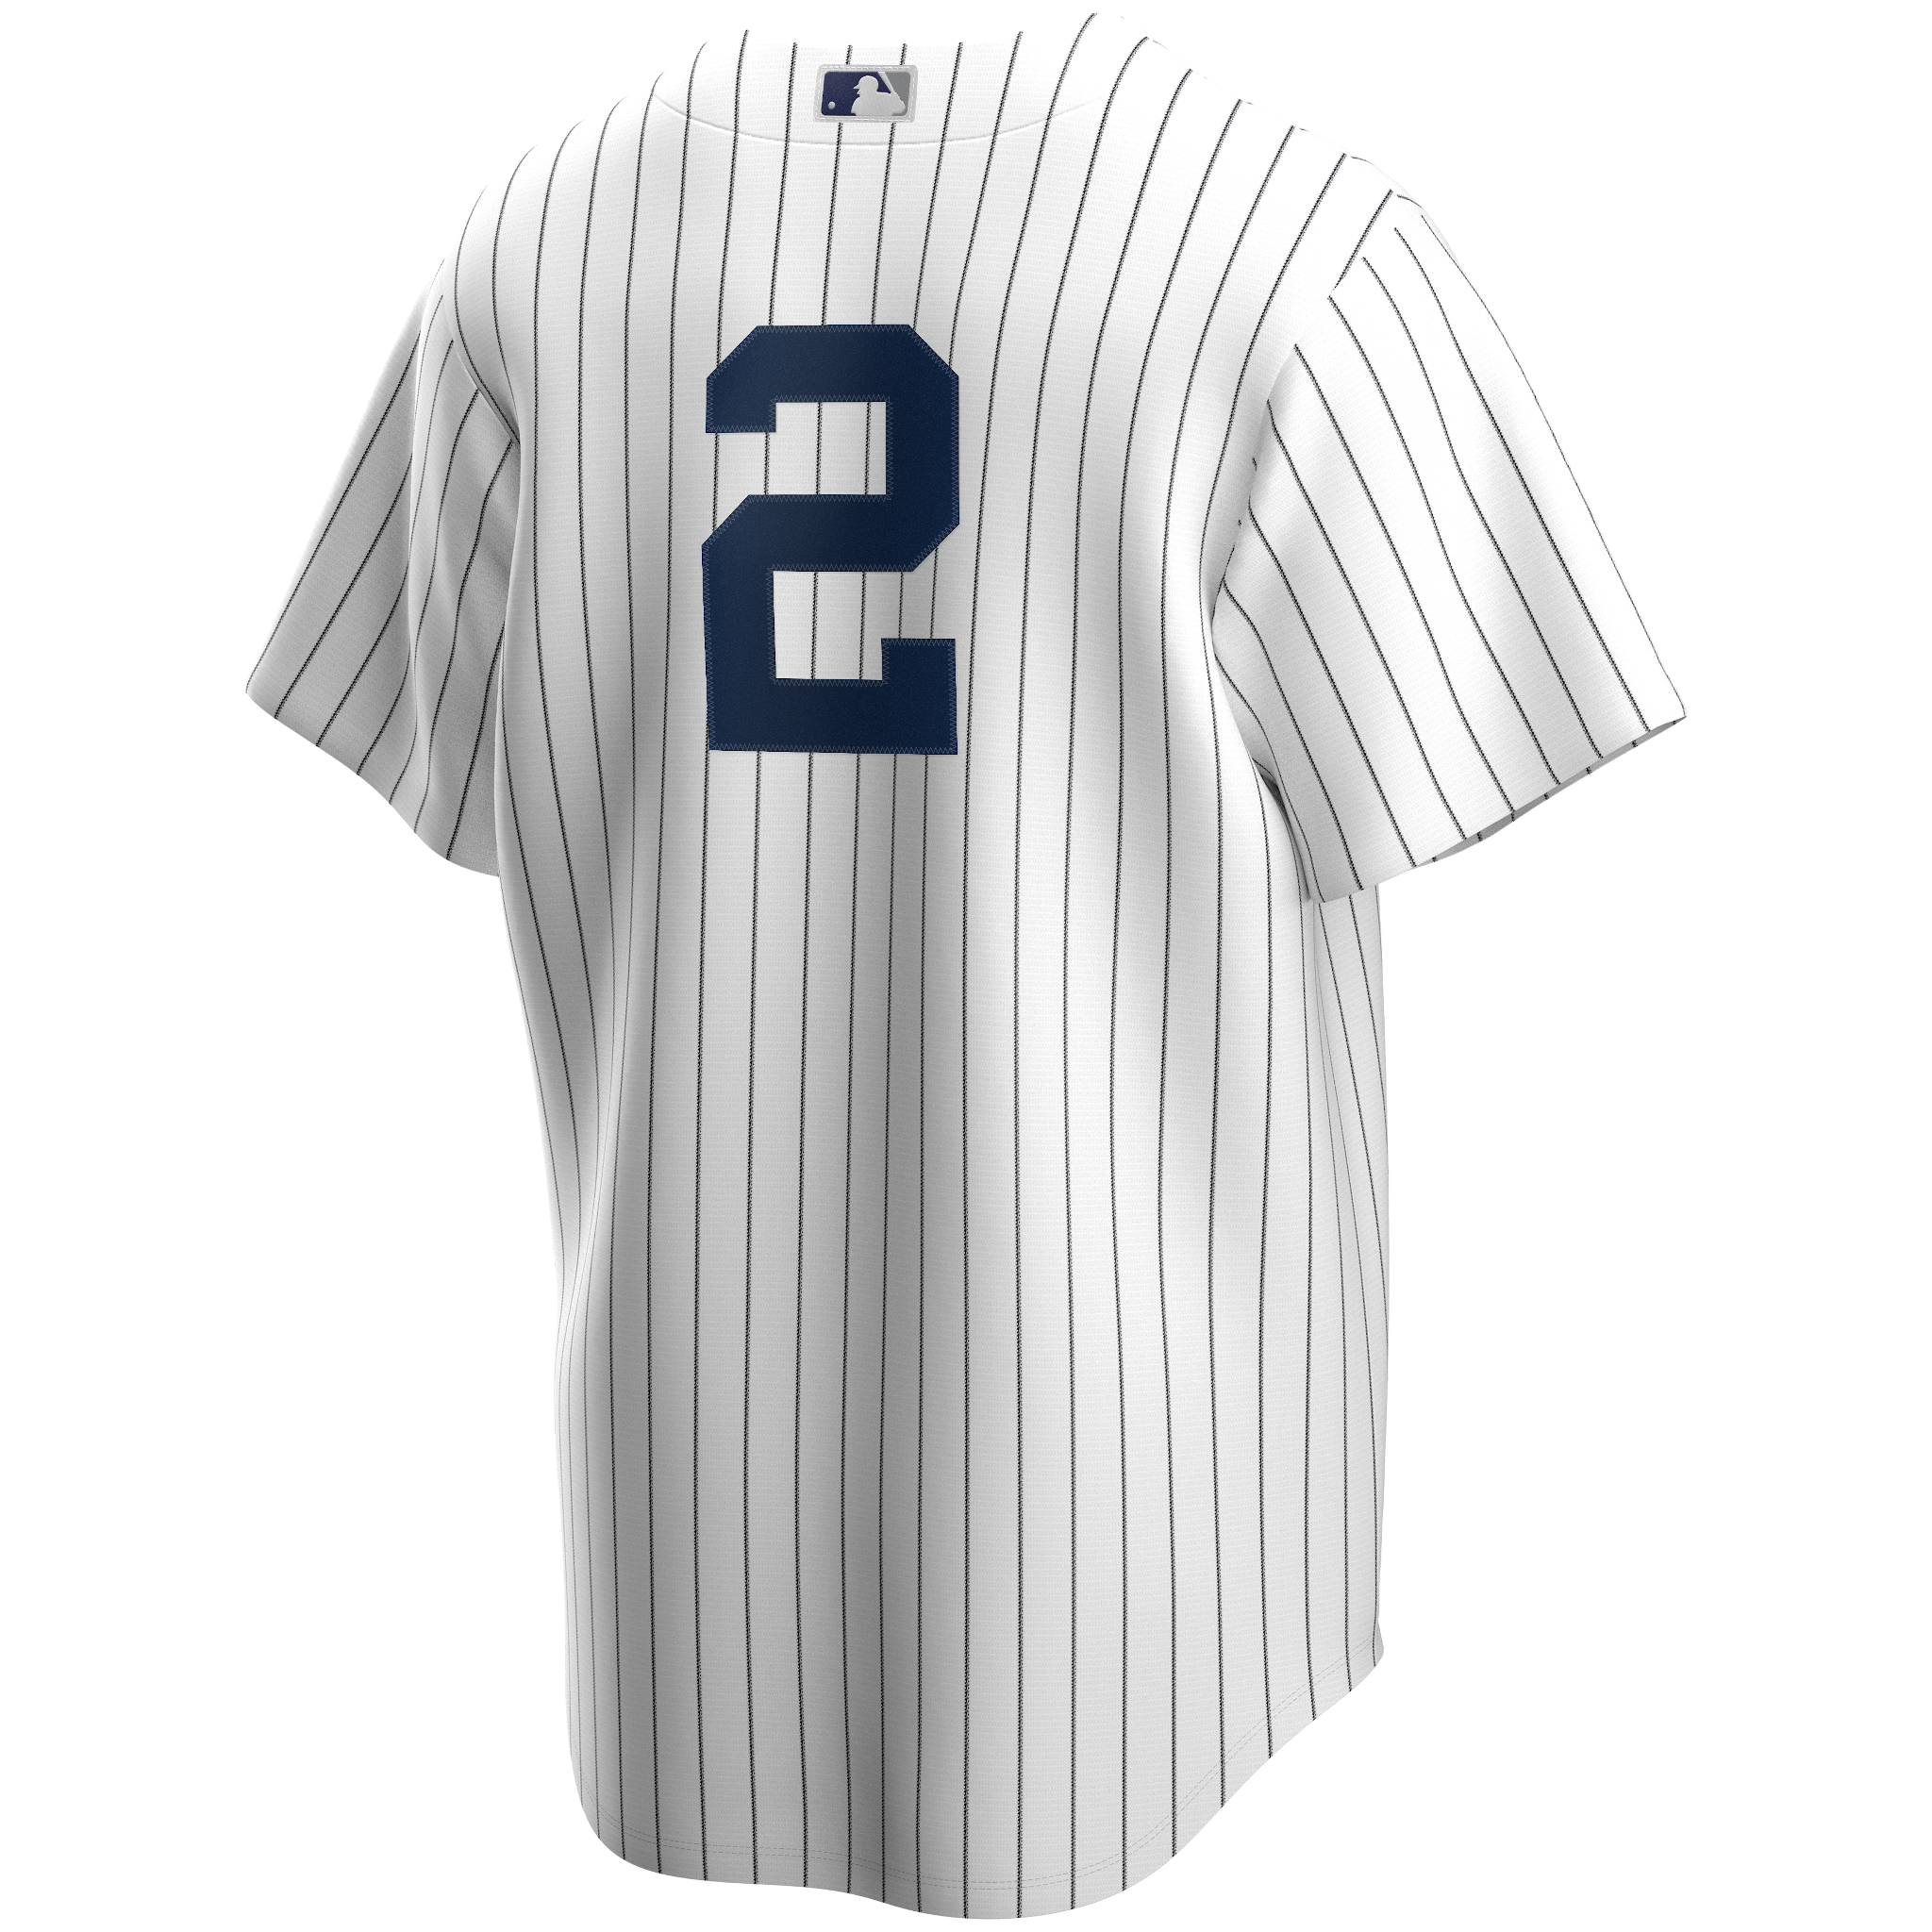 I Wanted 13, My Dad Wore 13”- Derek Jeter Reveals Why New York Yankees Did  Not Give Him the Jersey Number of His Choice - EssentiallySports